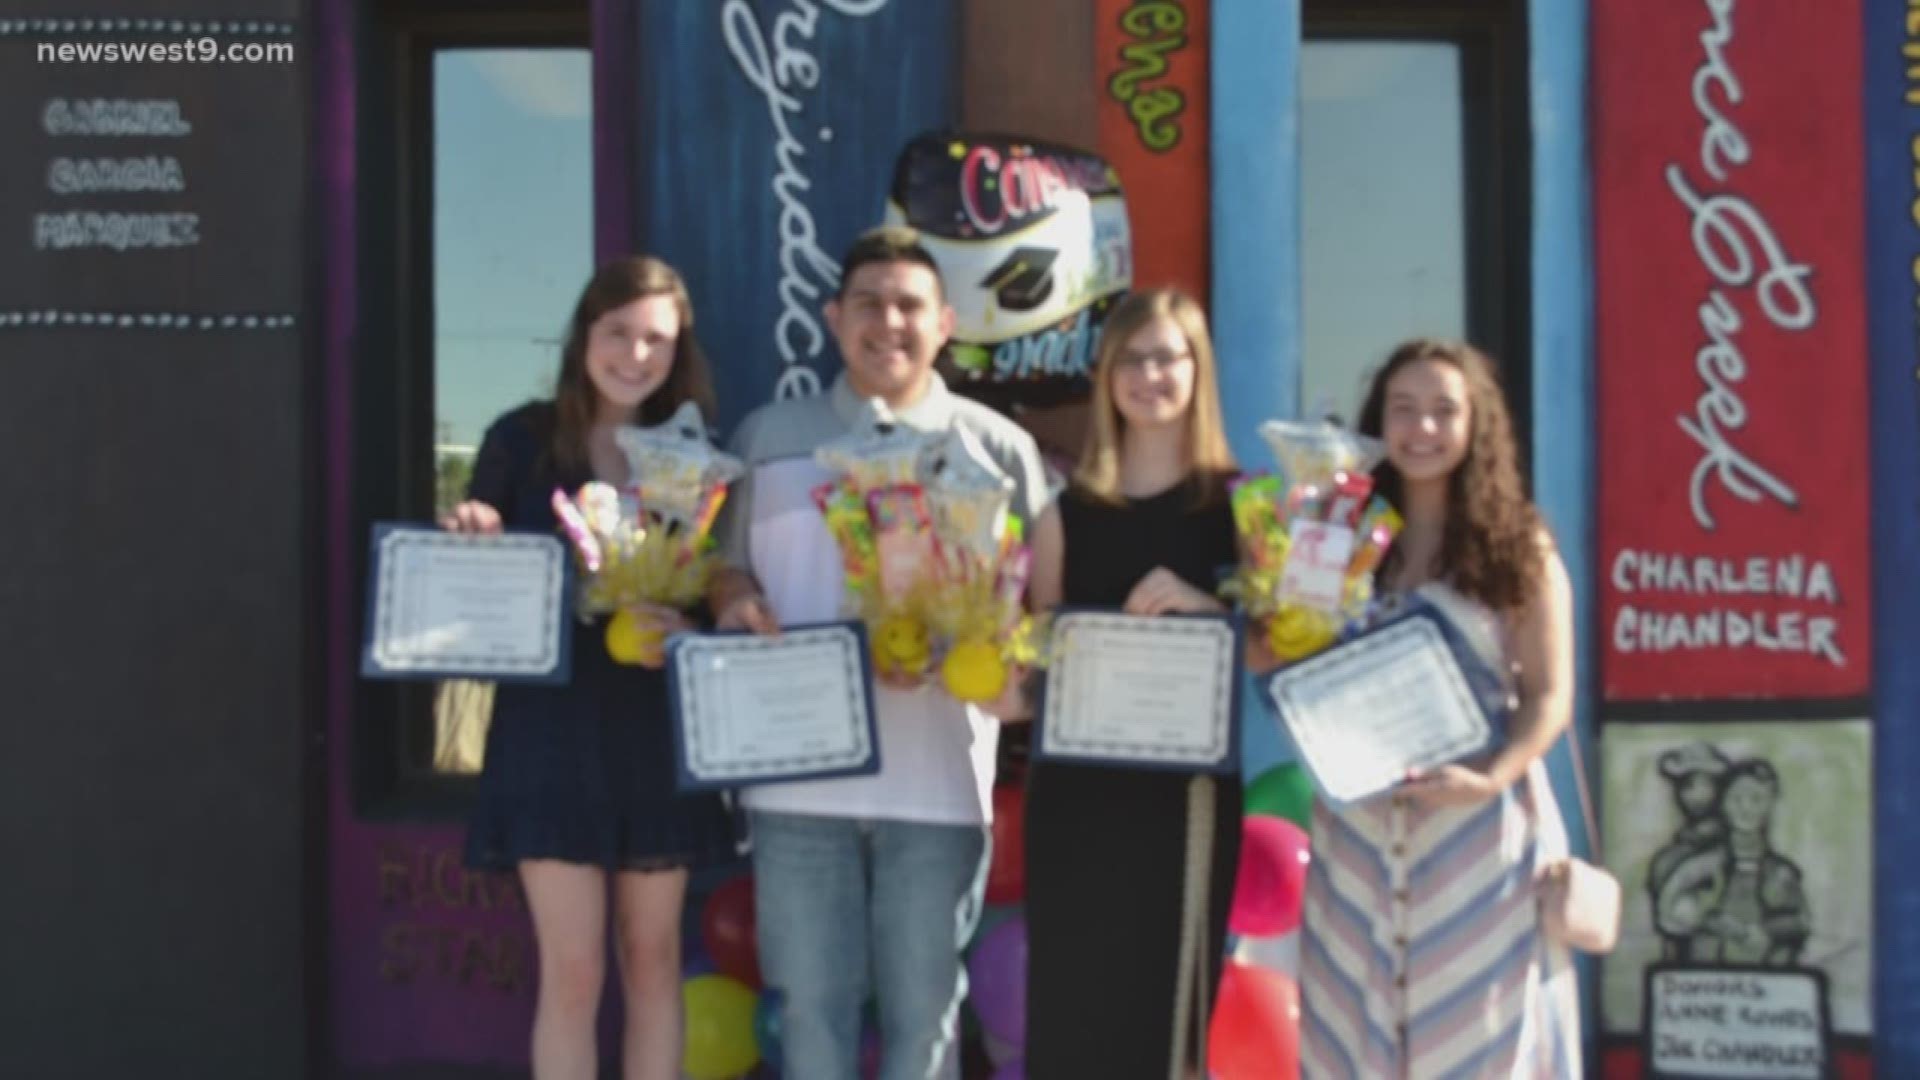 In total, $15,000 in scholarship funds were awarded to four Midland graduating seniors